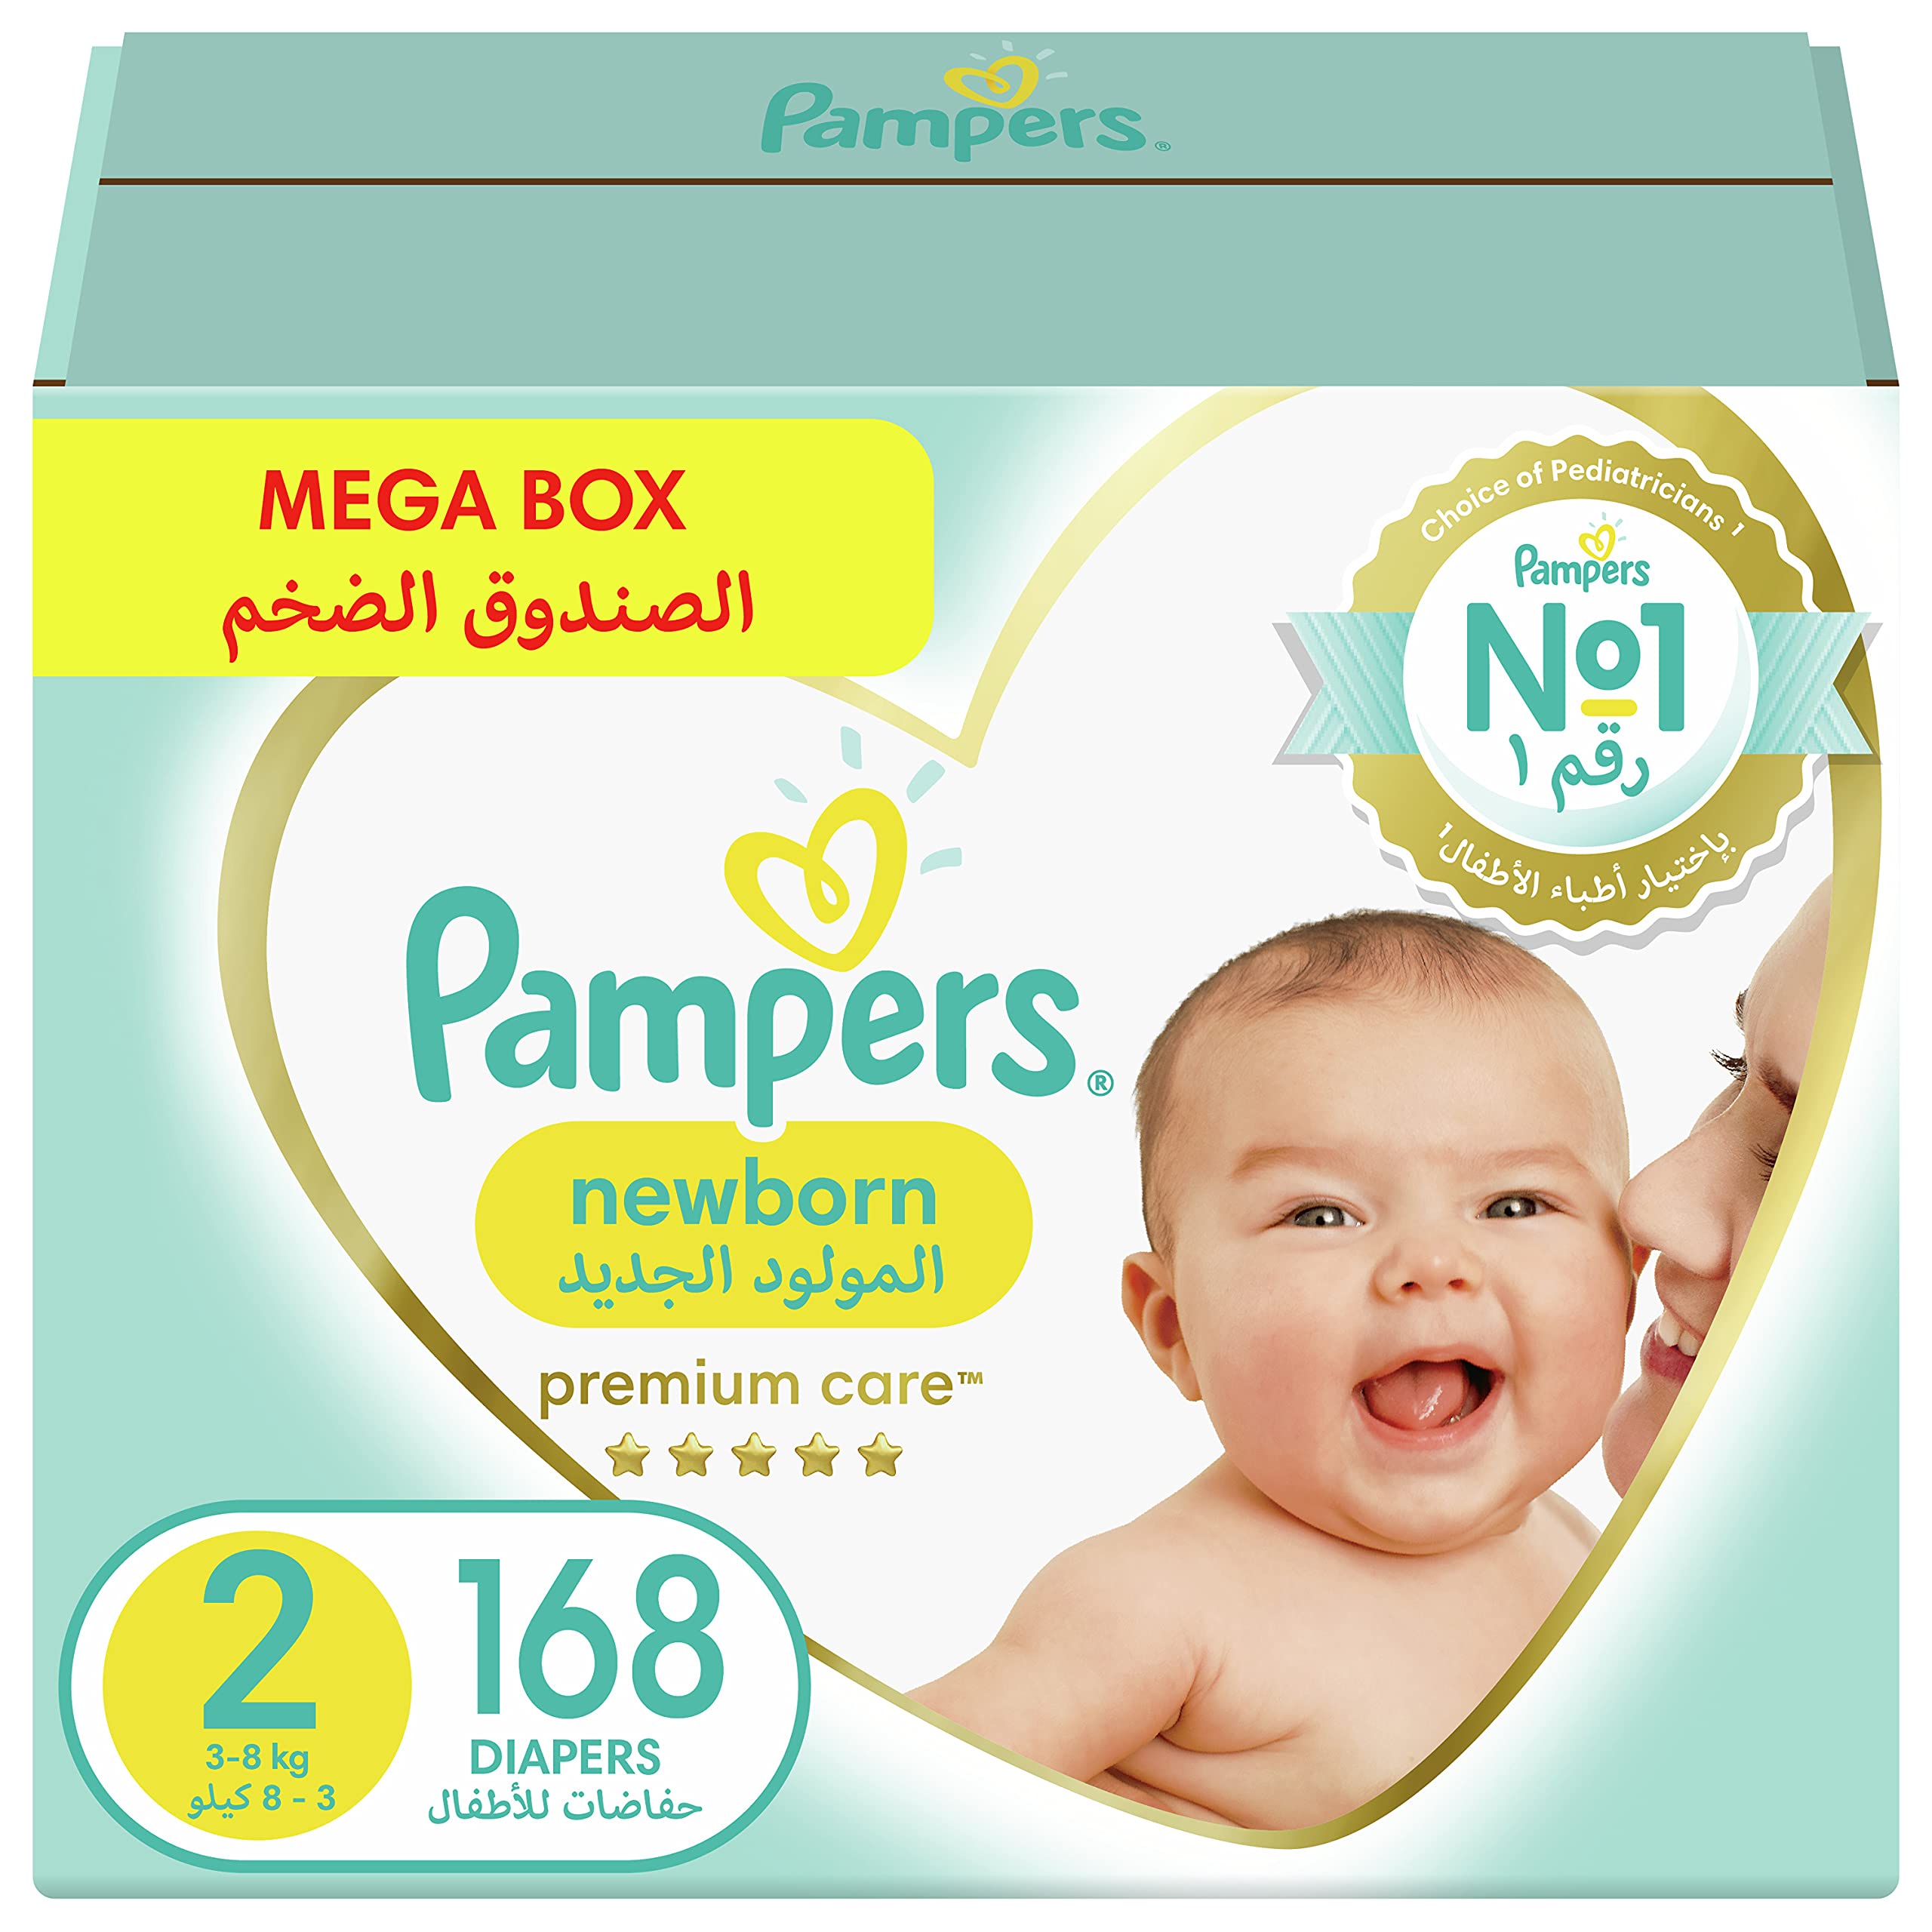 pampers generator imion